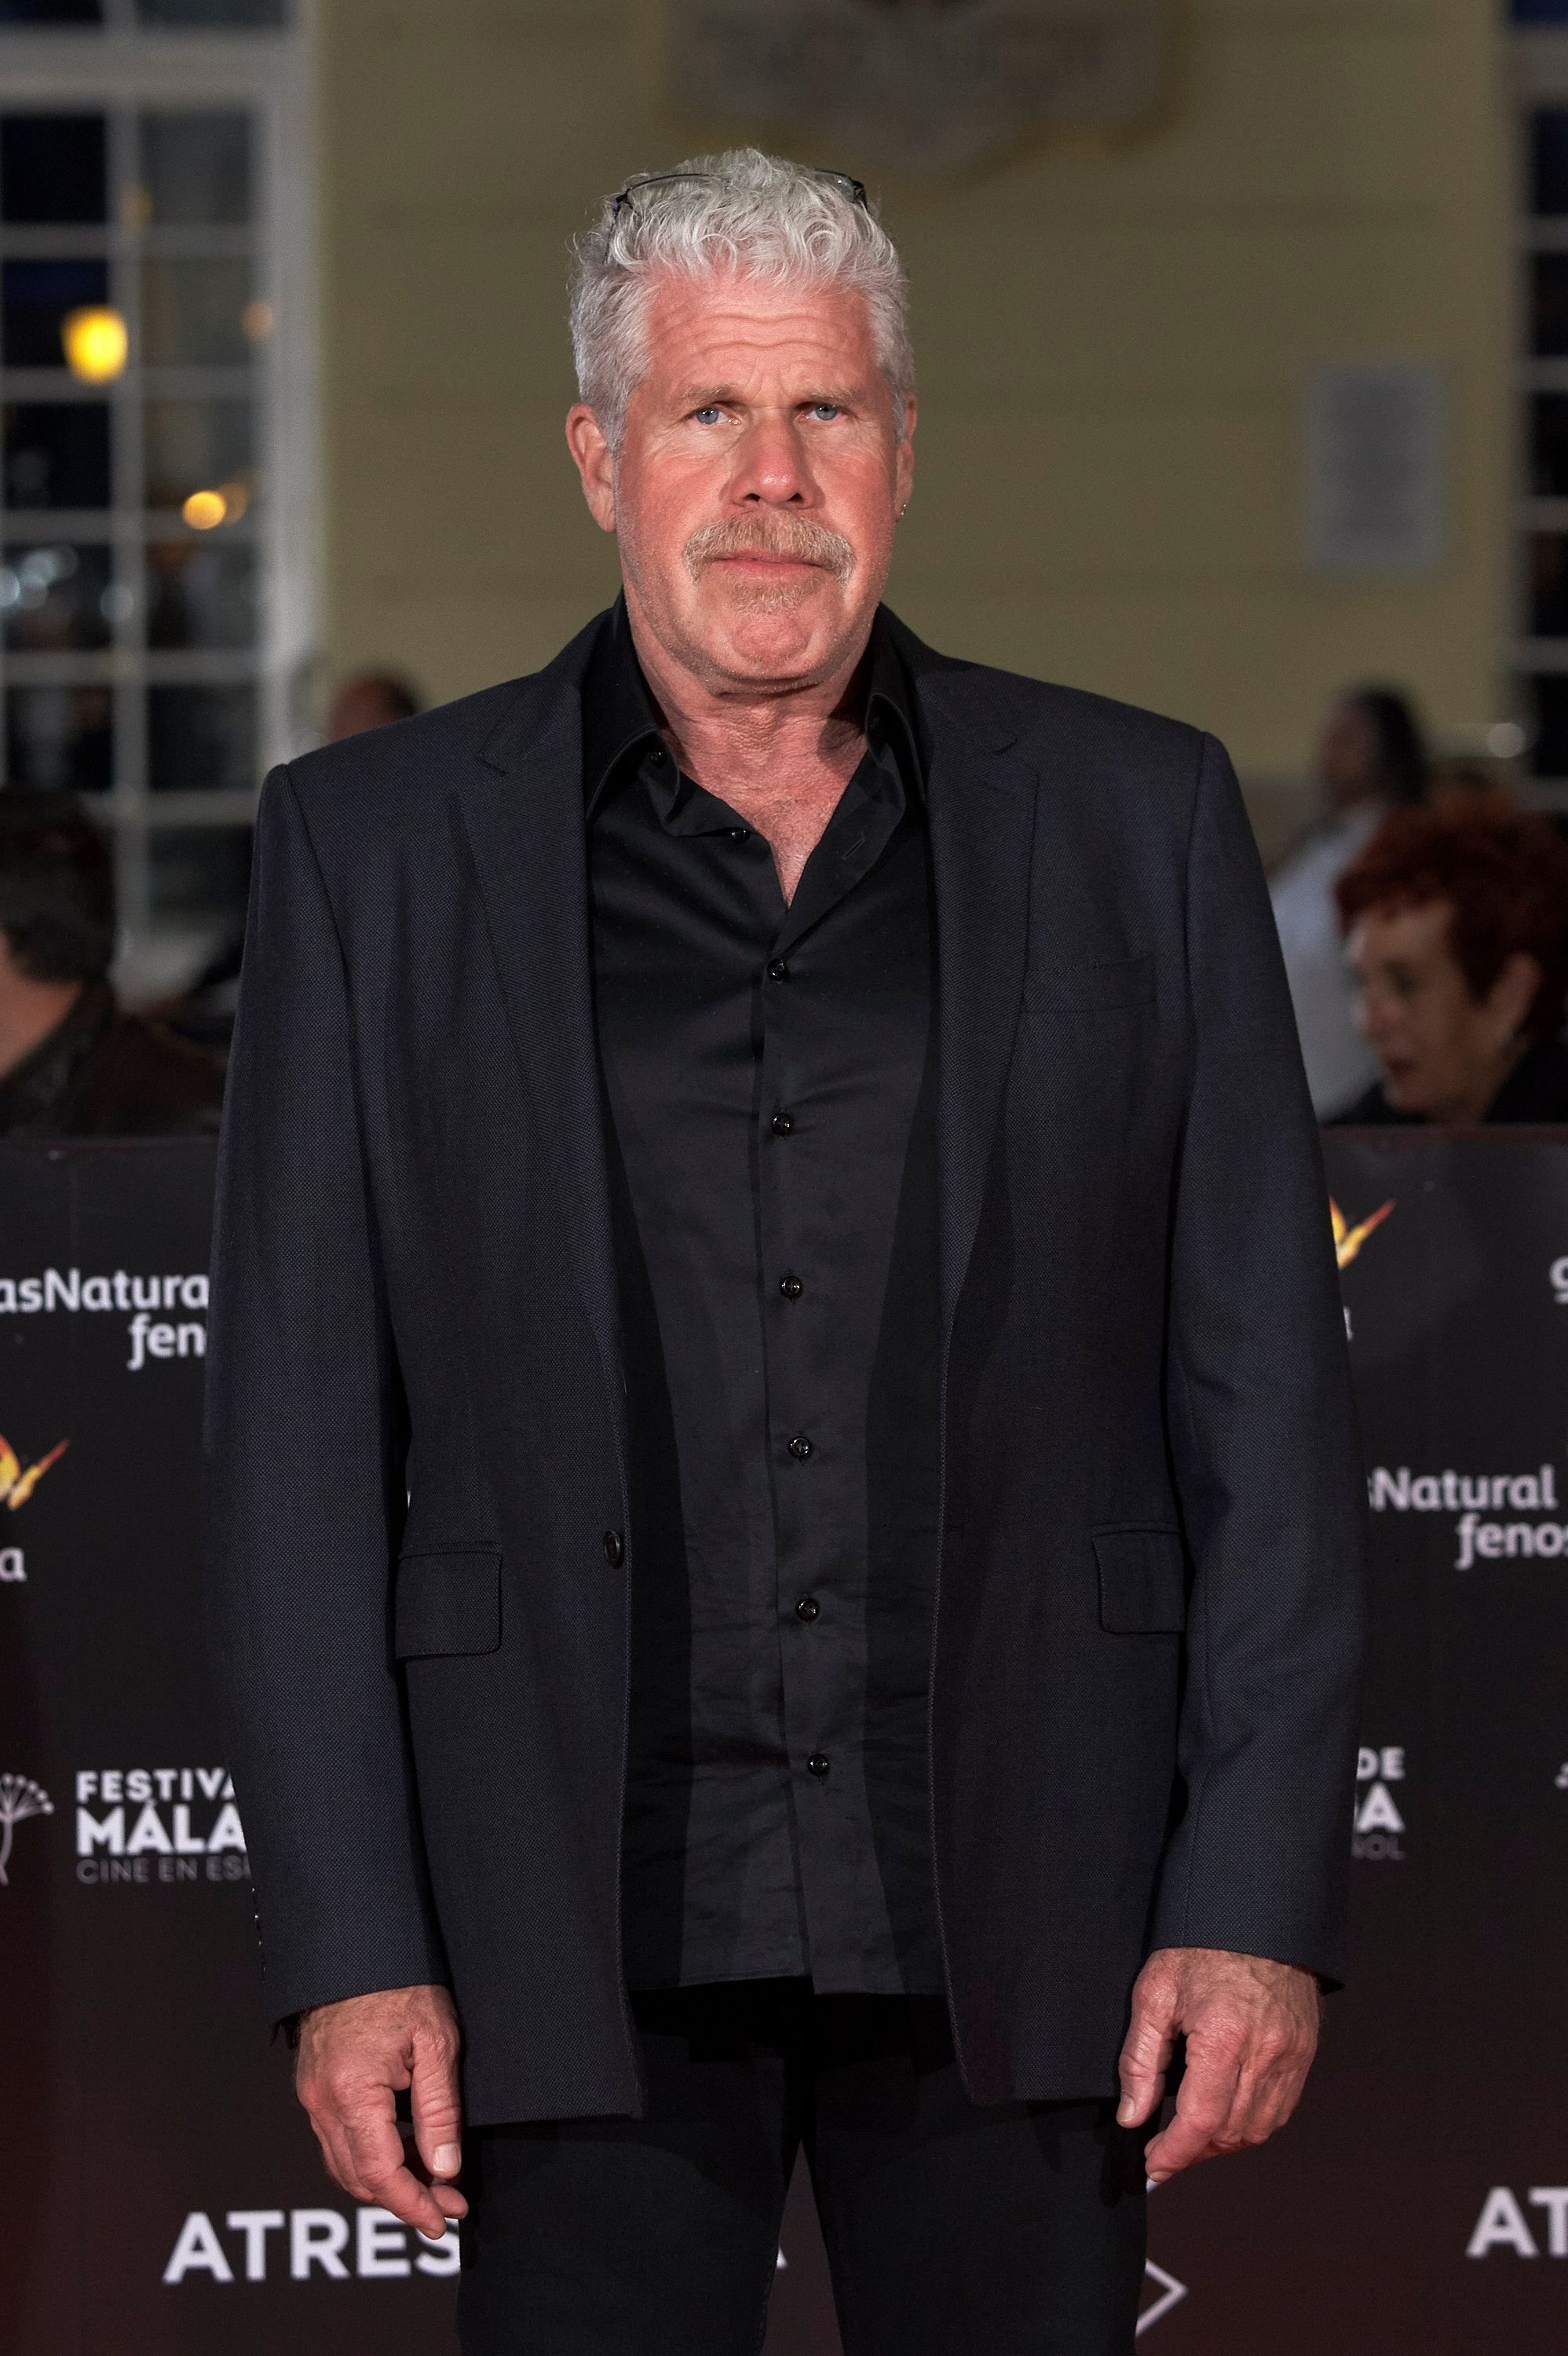 Ron Perlman attends 'No Dormiras' premiere at the Cervantes Theater on April 15, 2018 in Malaga, Spain. | Source: Getty Images